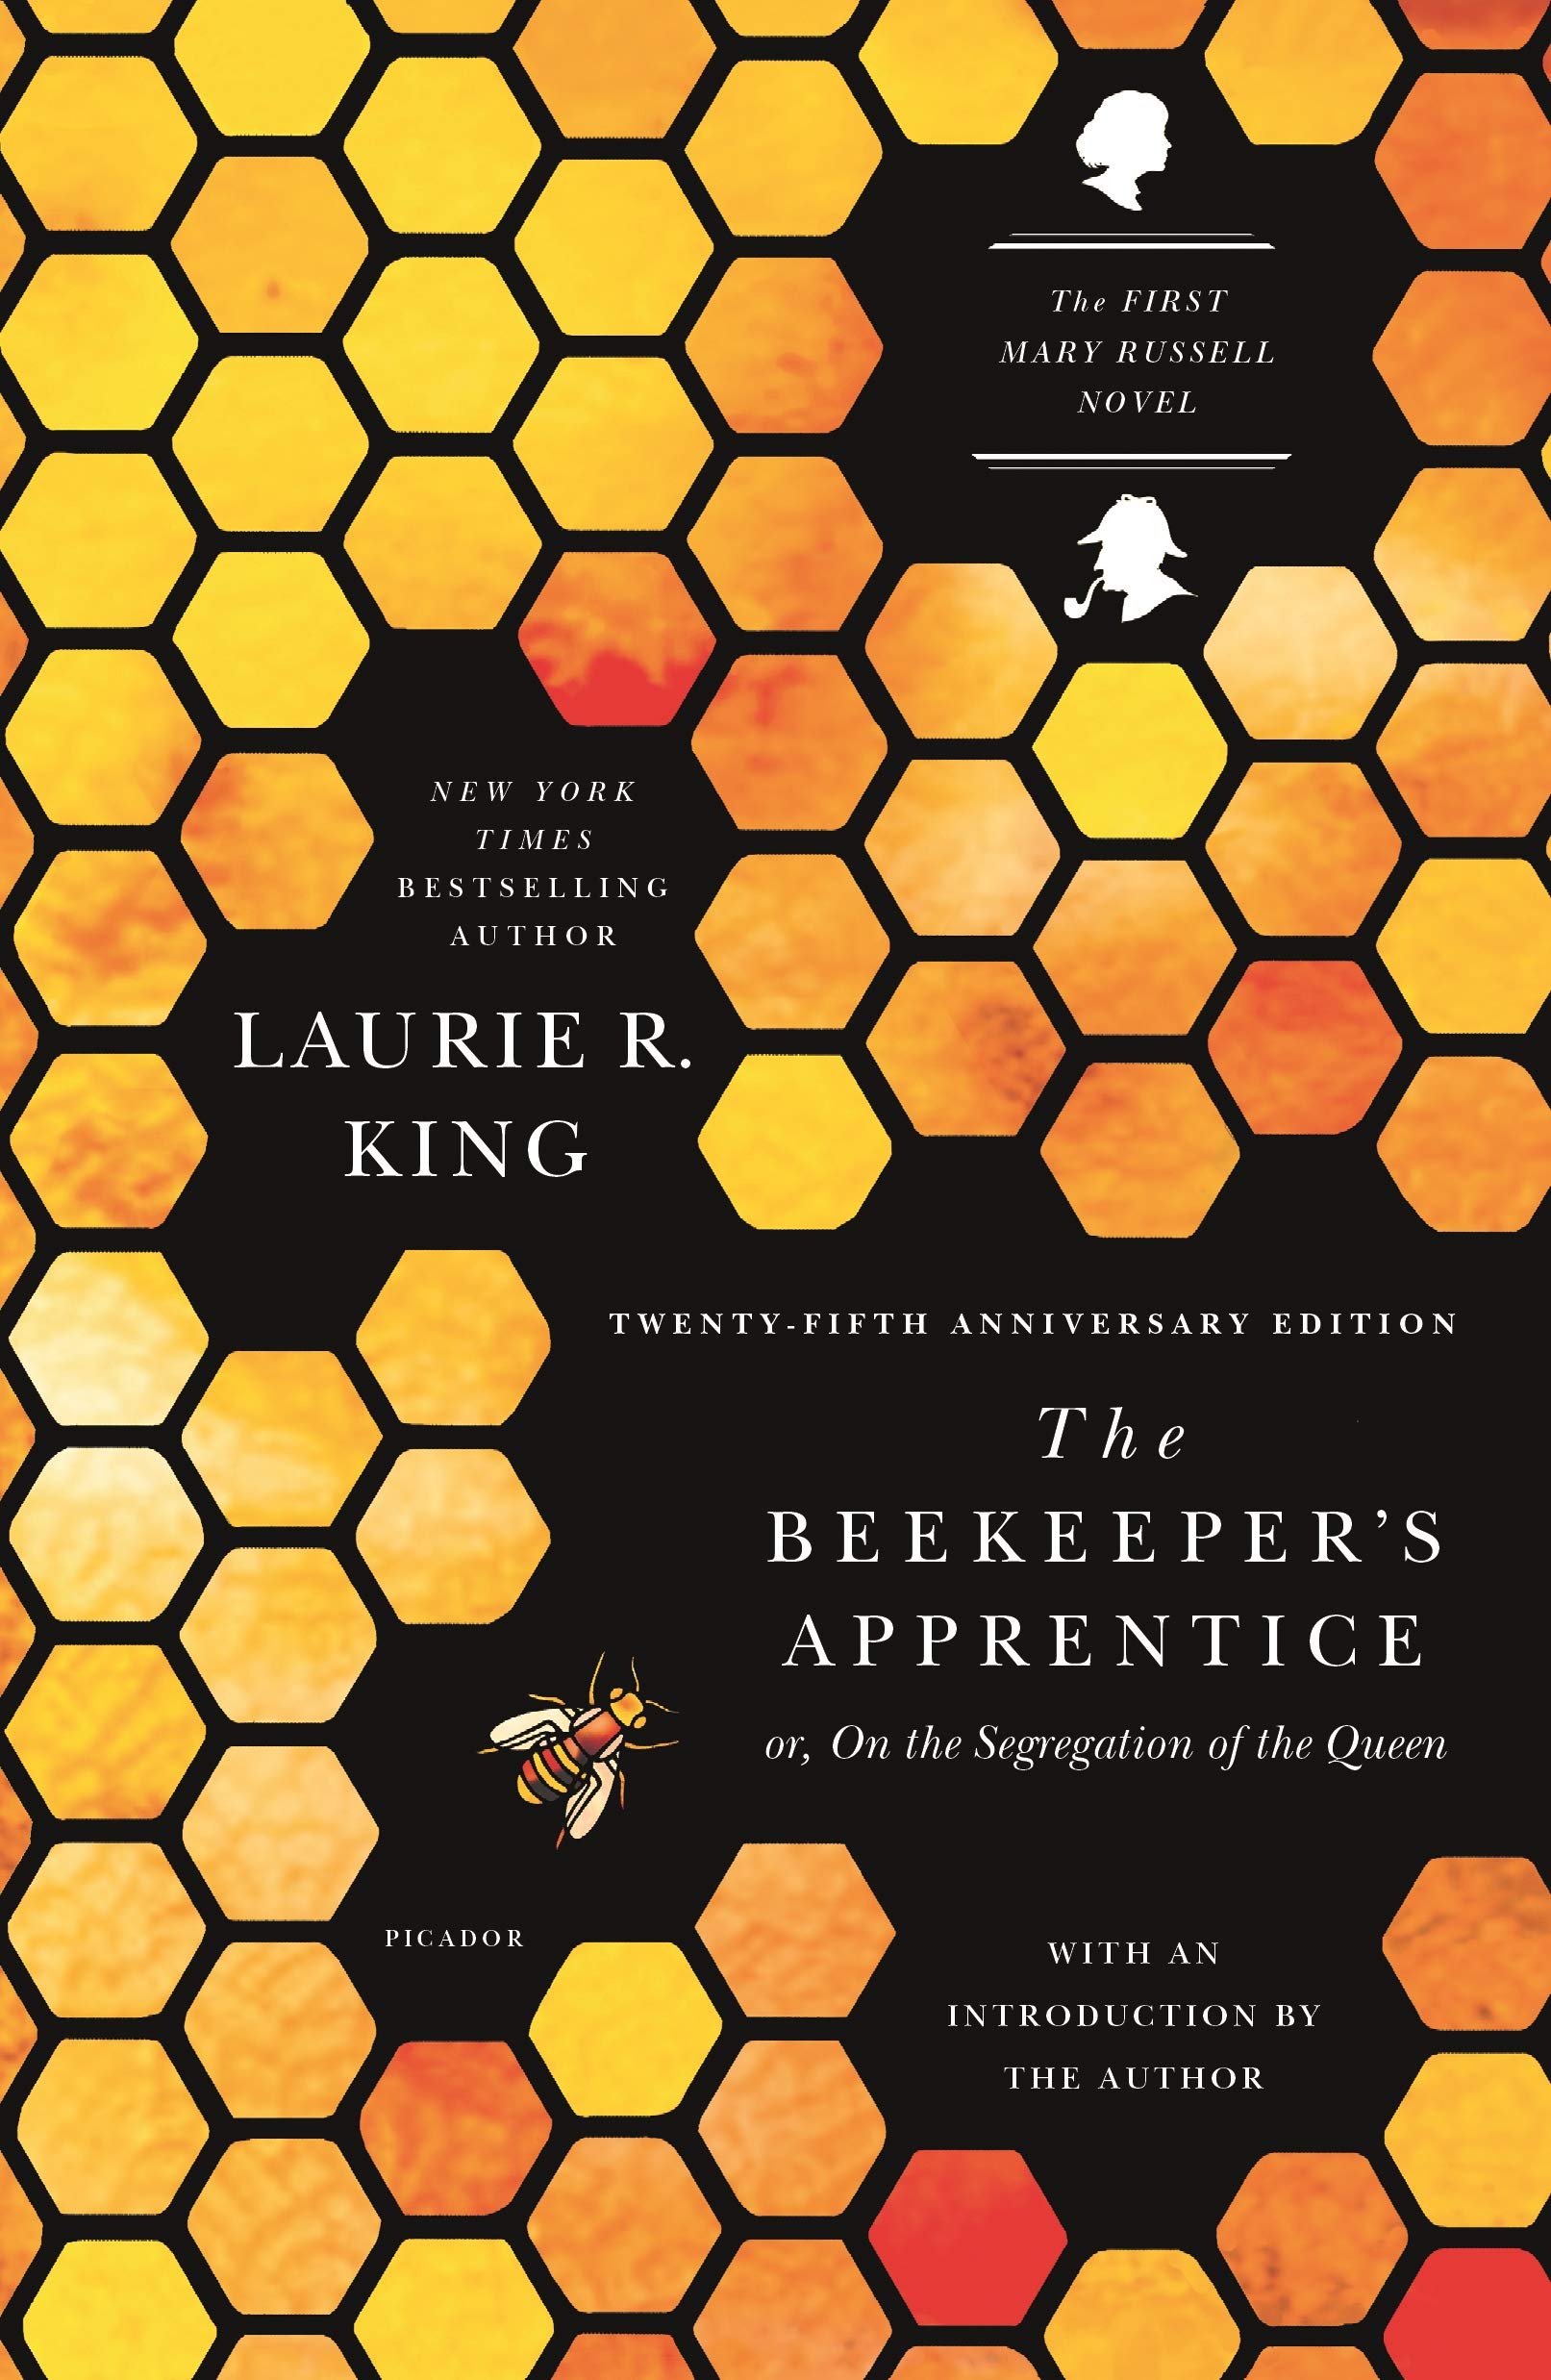 Cover for "The Beekeeper's Apprentice"